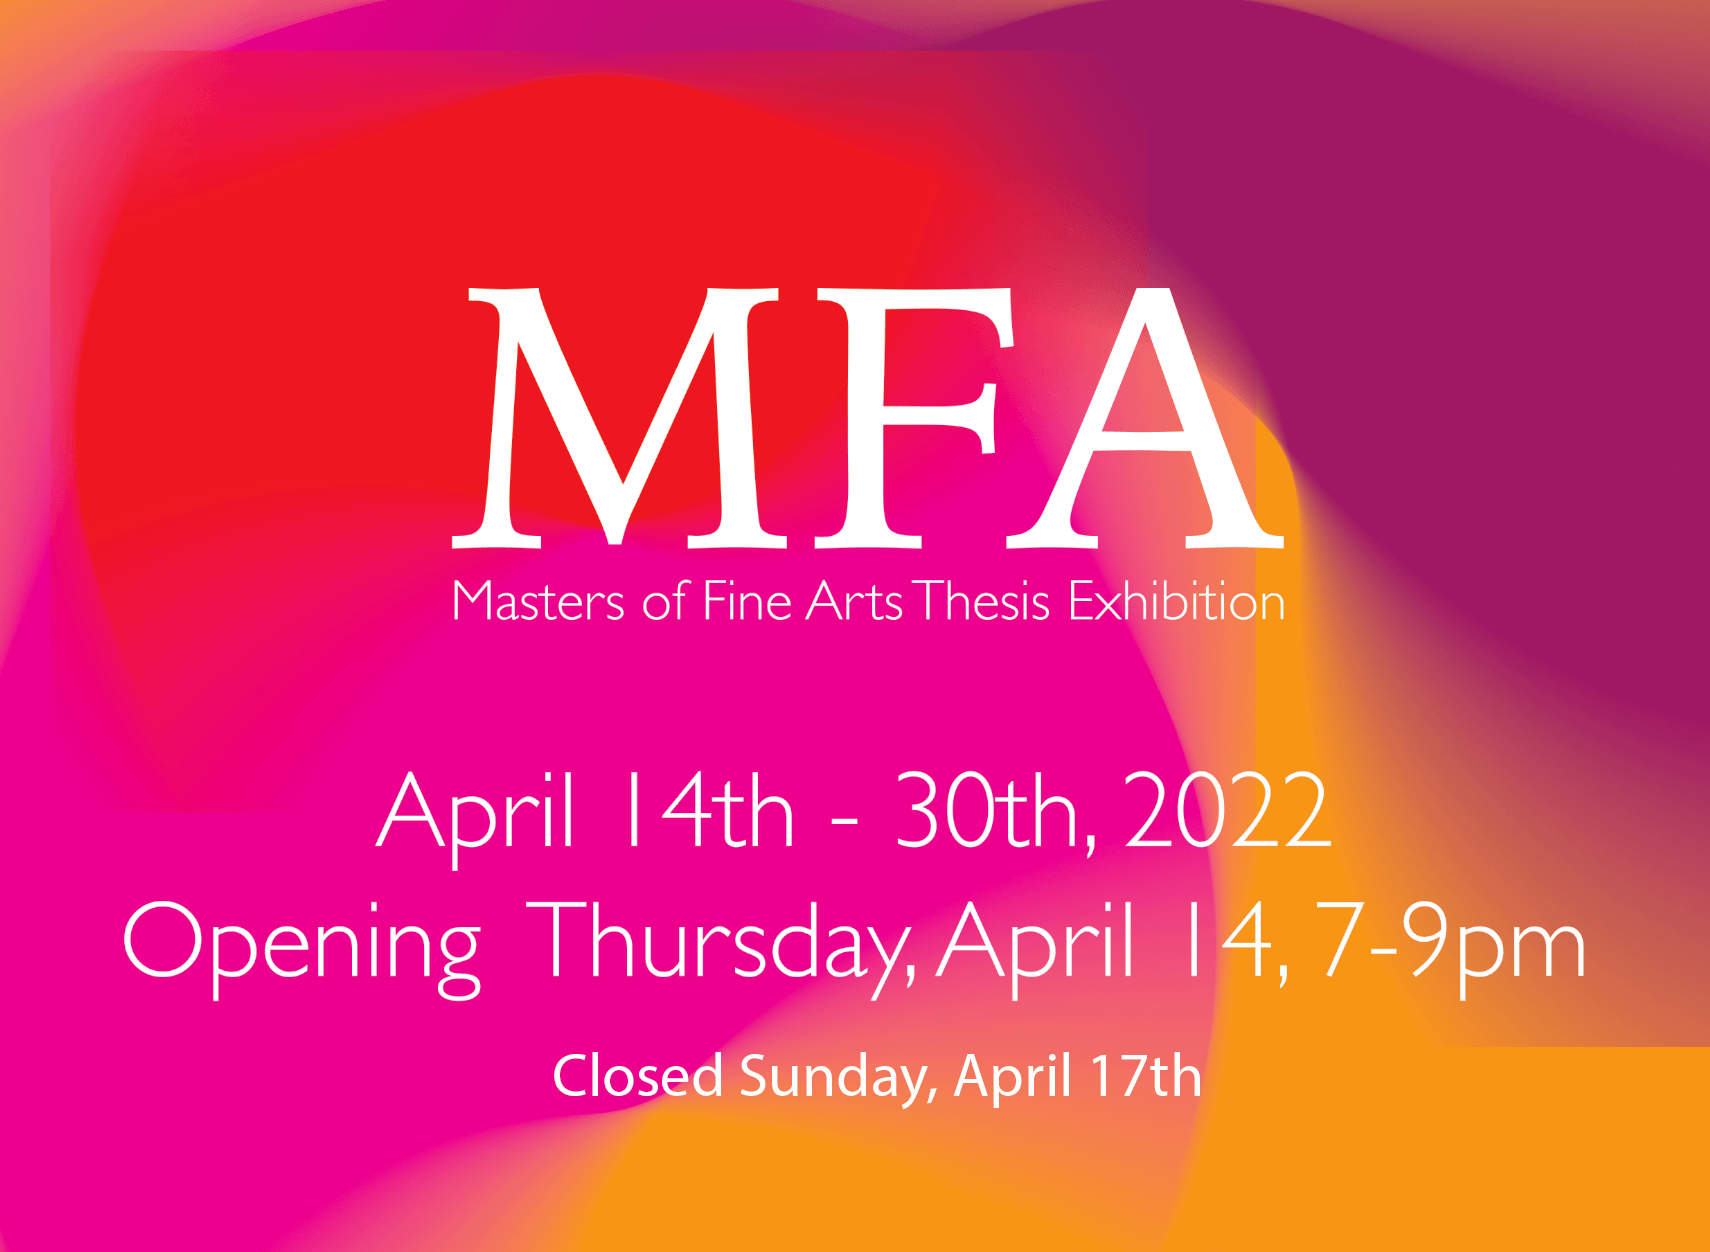 "MFA April 14th - 30th 2022, Opening Thursday, April 14th, 7-9pm" over decorative background